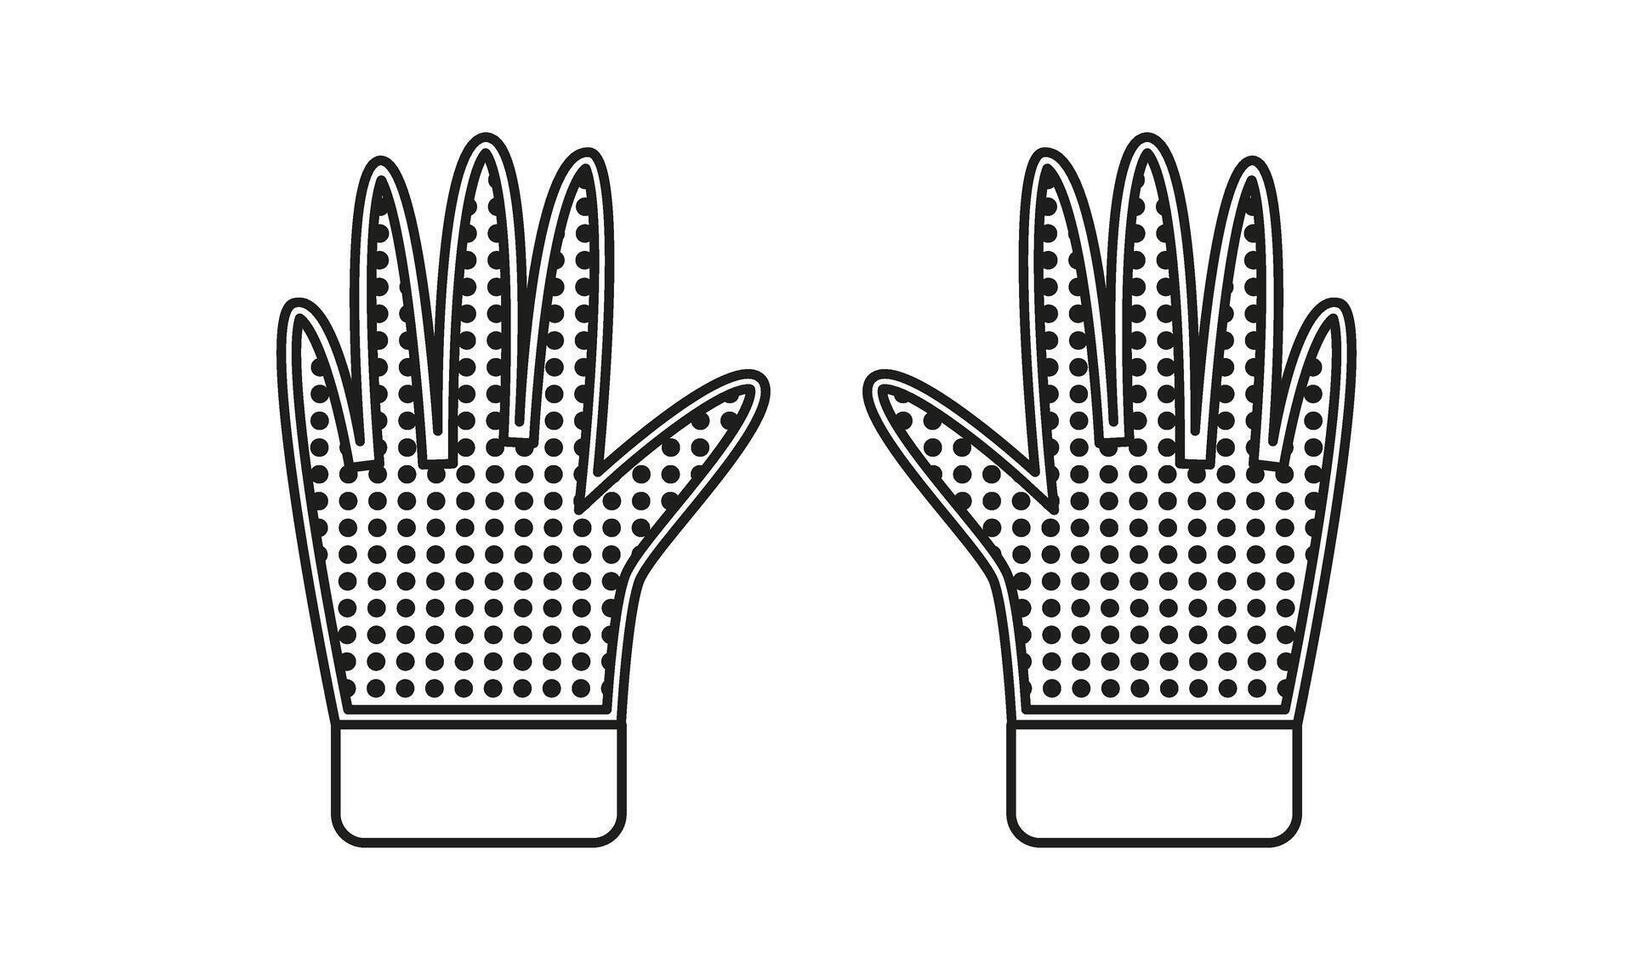 Linear garden and work gloves icon, sign, symbol. Isolated on white. Rubberized gloves. Gardening and farming. Black and white. vector